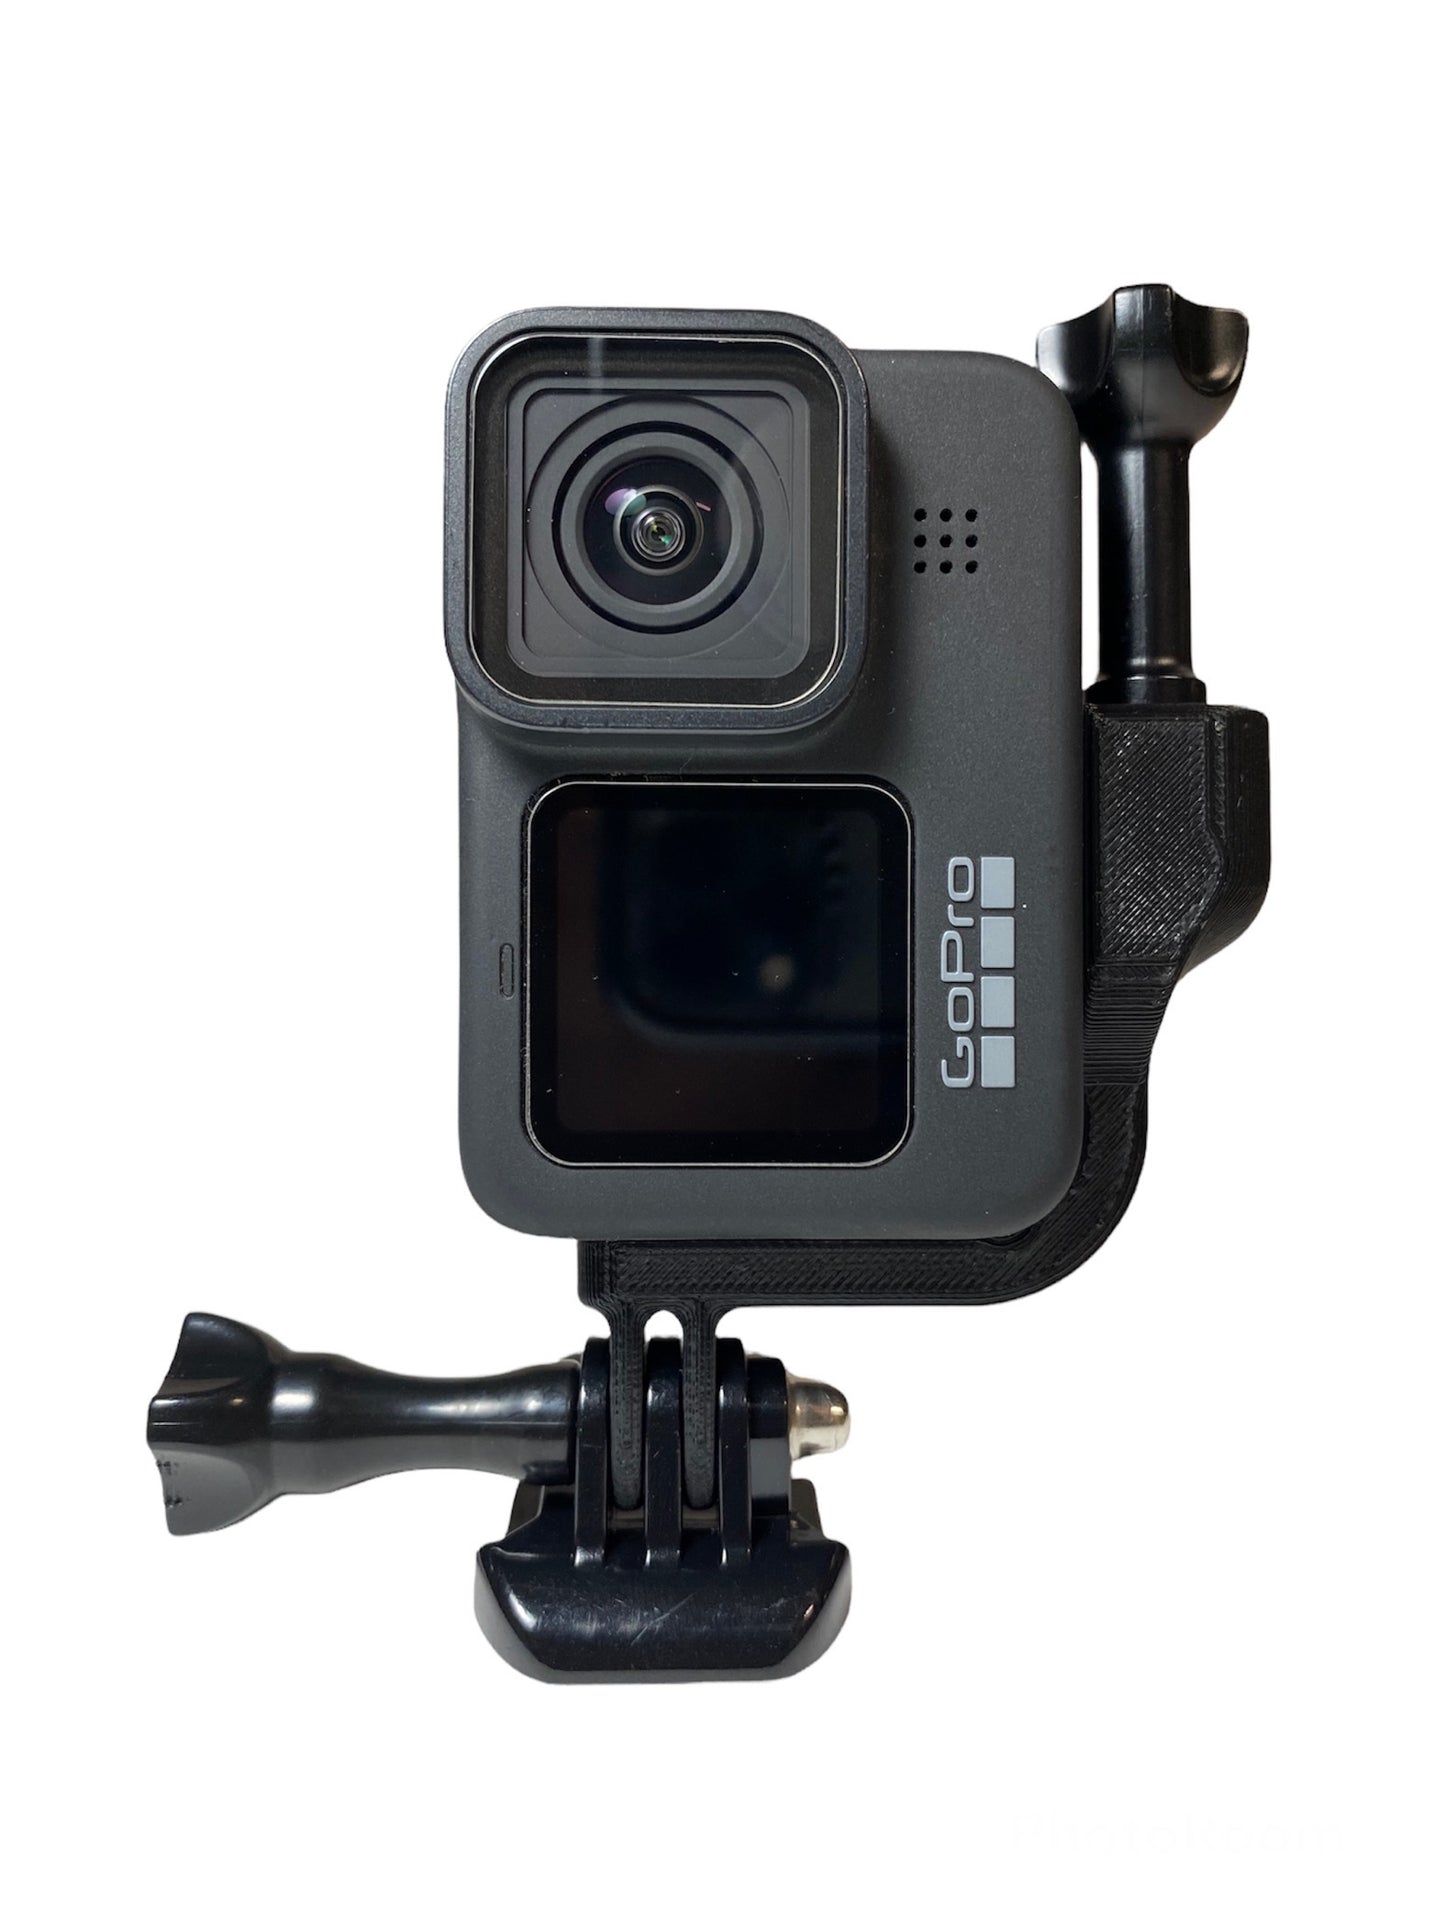 Vertical Adapter (90 Degree Elbow Mount) for GoPro Hero 8 – By Ritchie